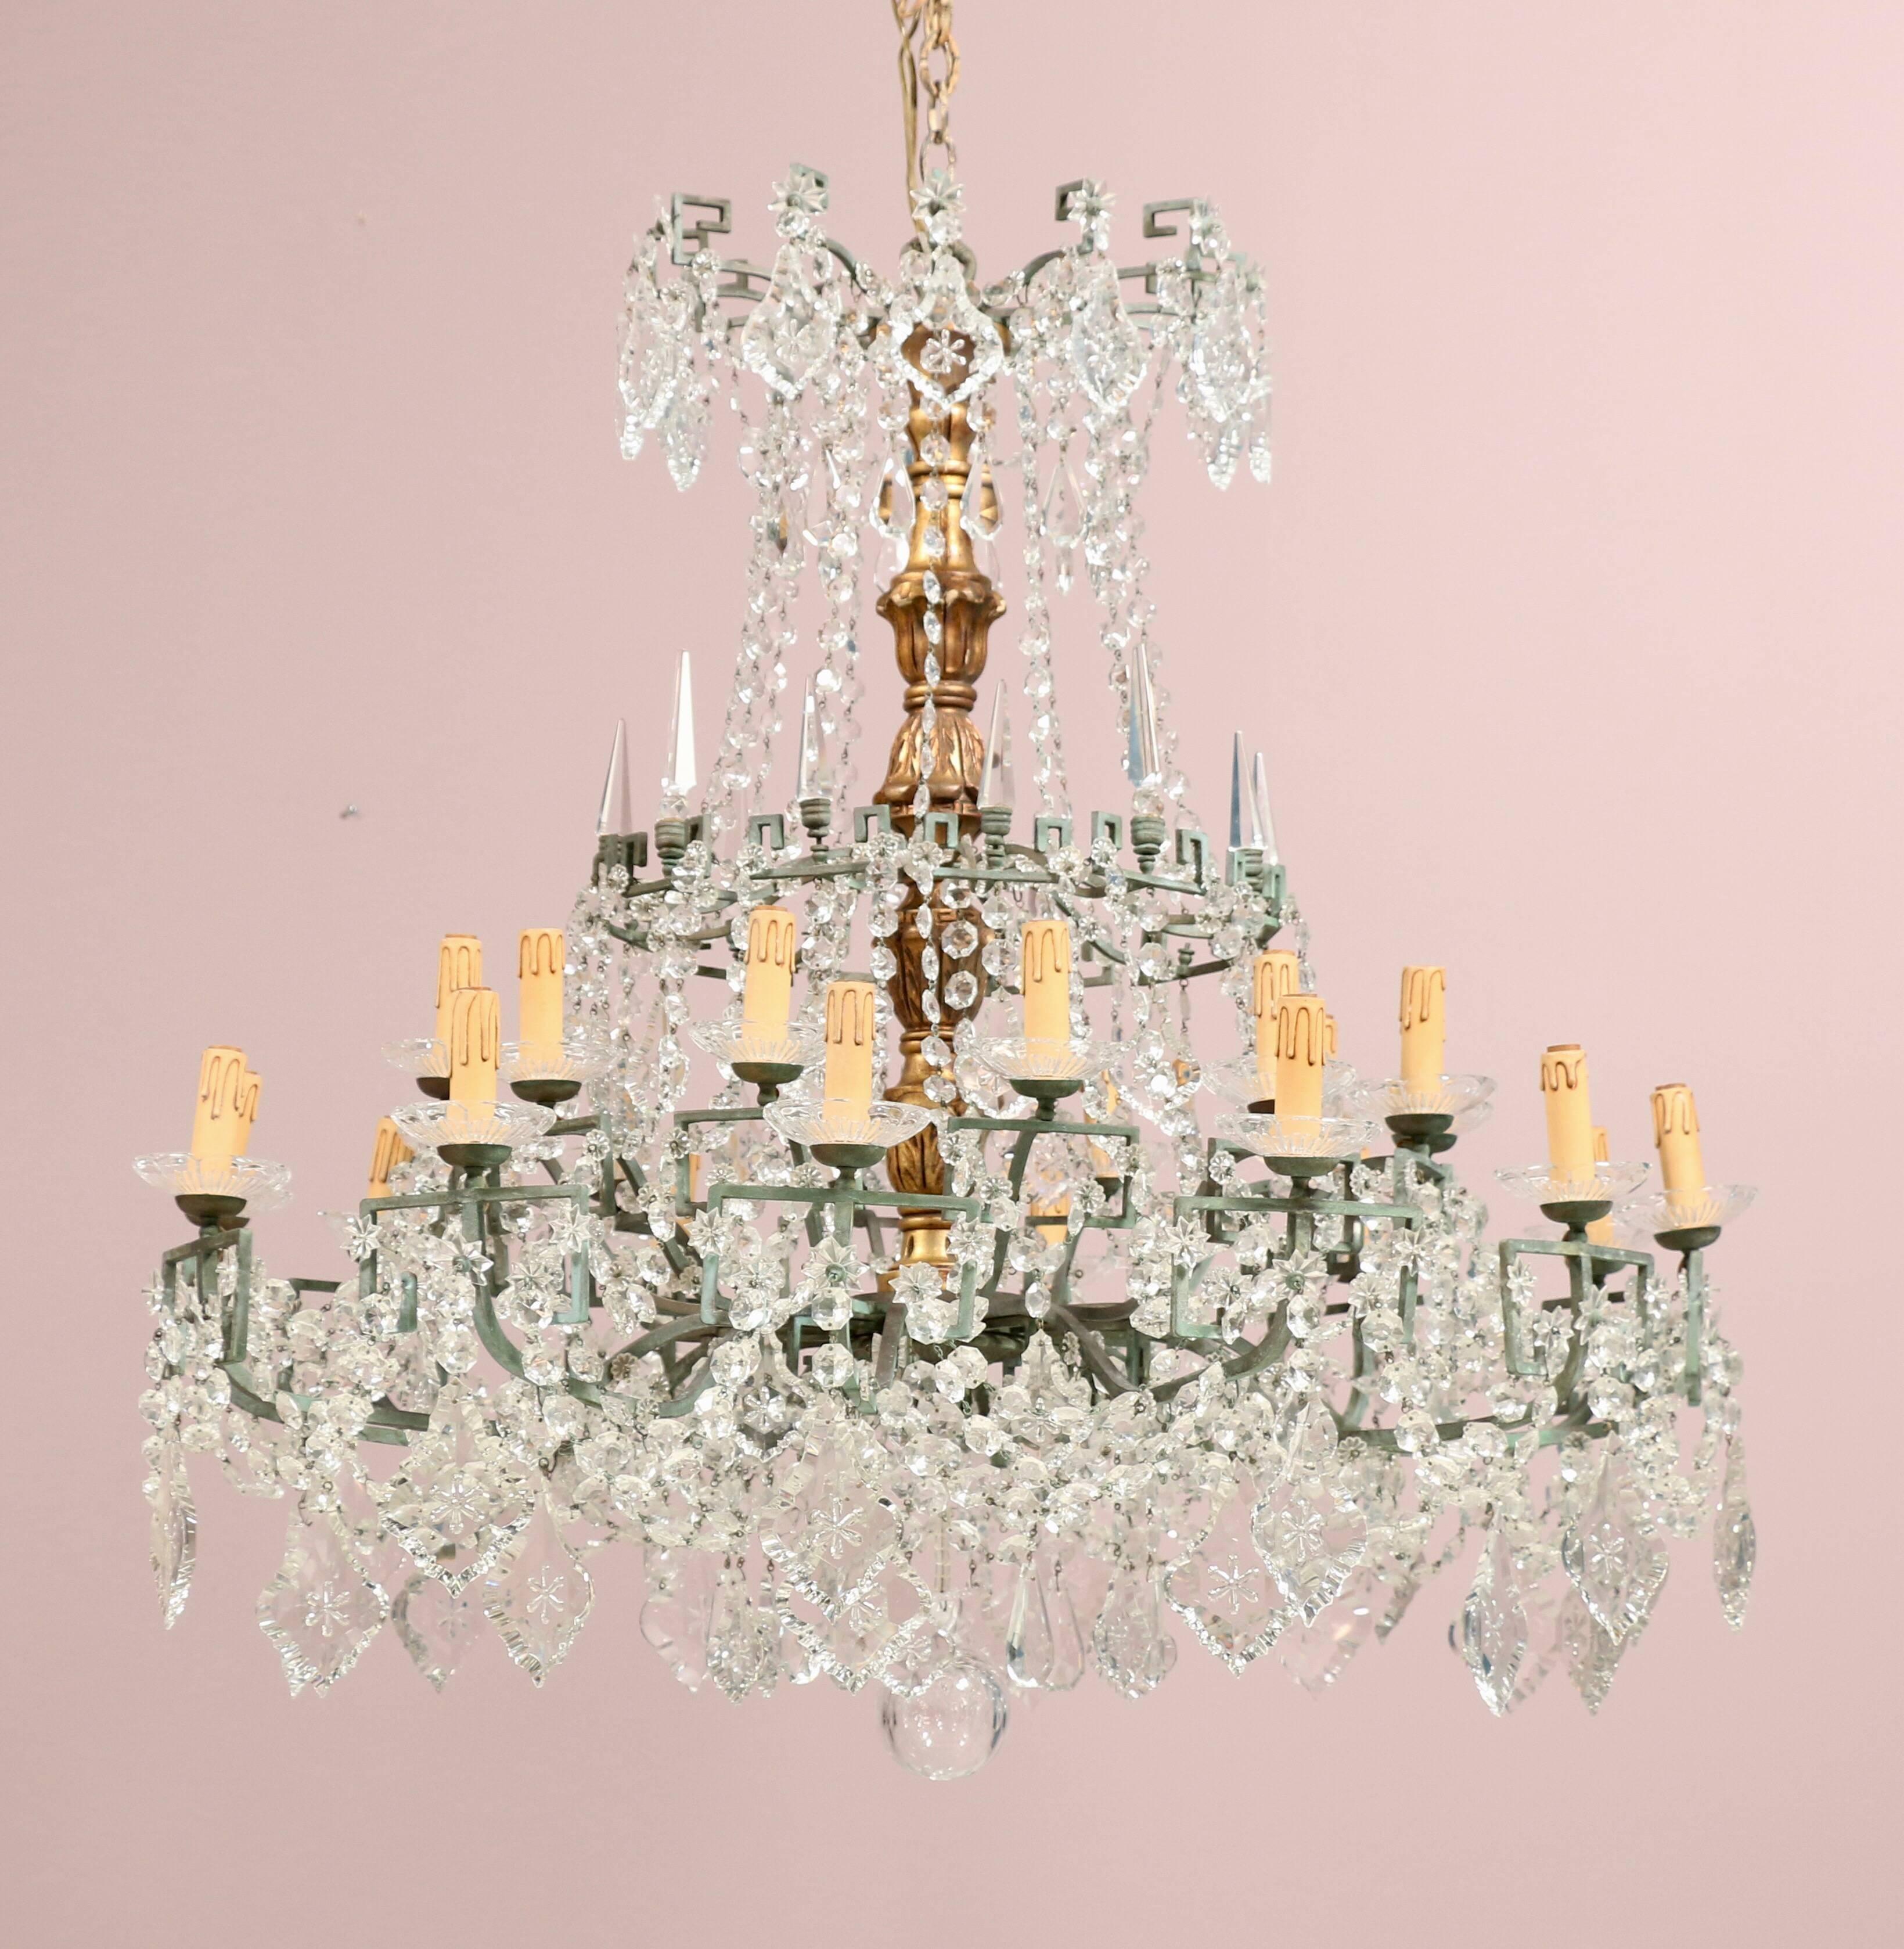 Majestic 1940s, Italian crystal, gilt-wood and bronze two-tier chandelier in the Neoclassical style. The chandelier is composed of a gilt-wood center column, a bronze frame with a Greek key motif and and an abundance of crystal beads and prisms (in